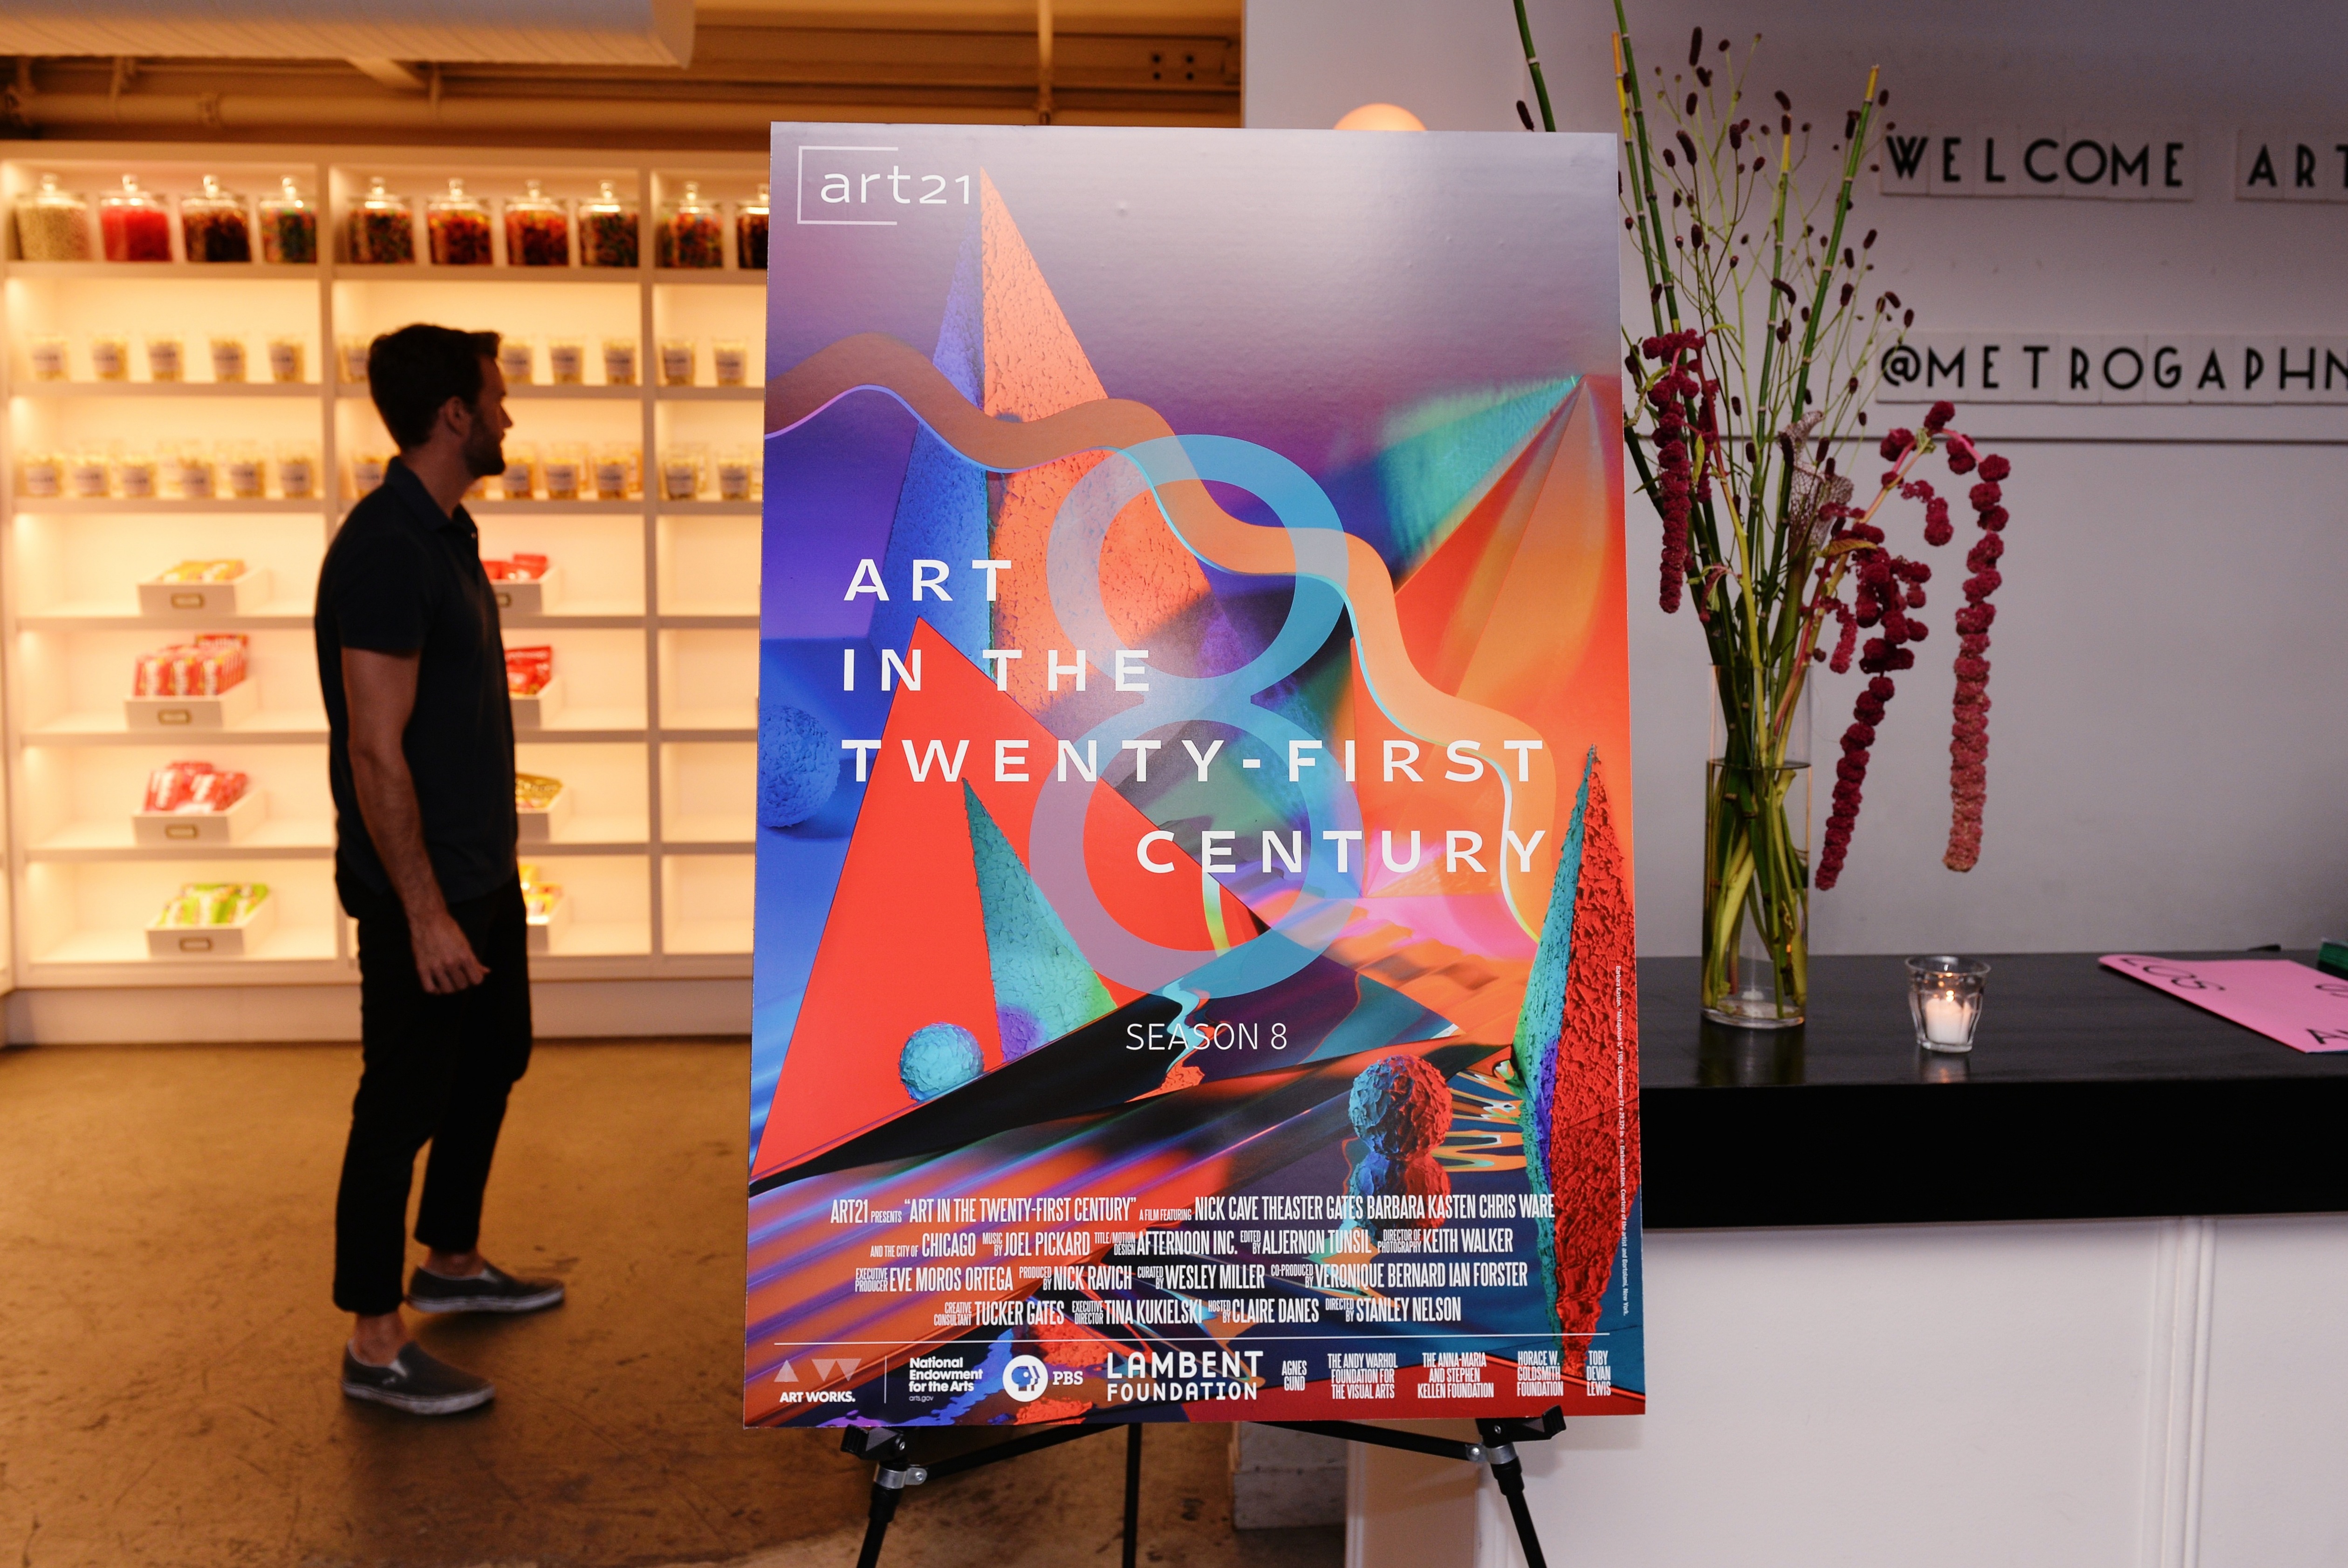 Image from the world premiere of Art in the Twenty-First Century Season 8, at Metrograph cinemas, September 14, 2016. Photo by Christos Katsiaouni.